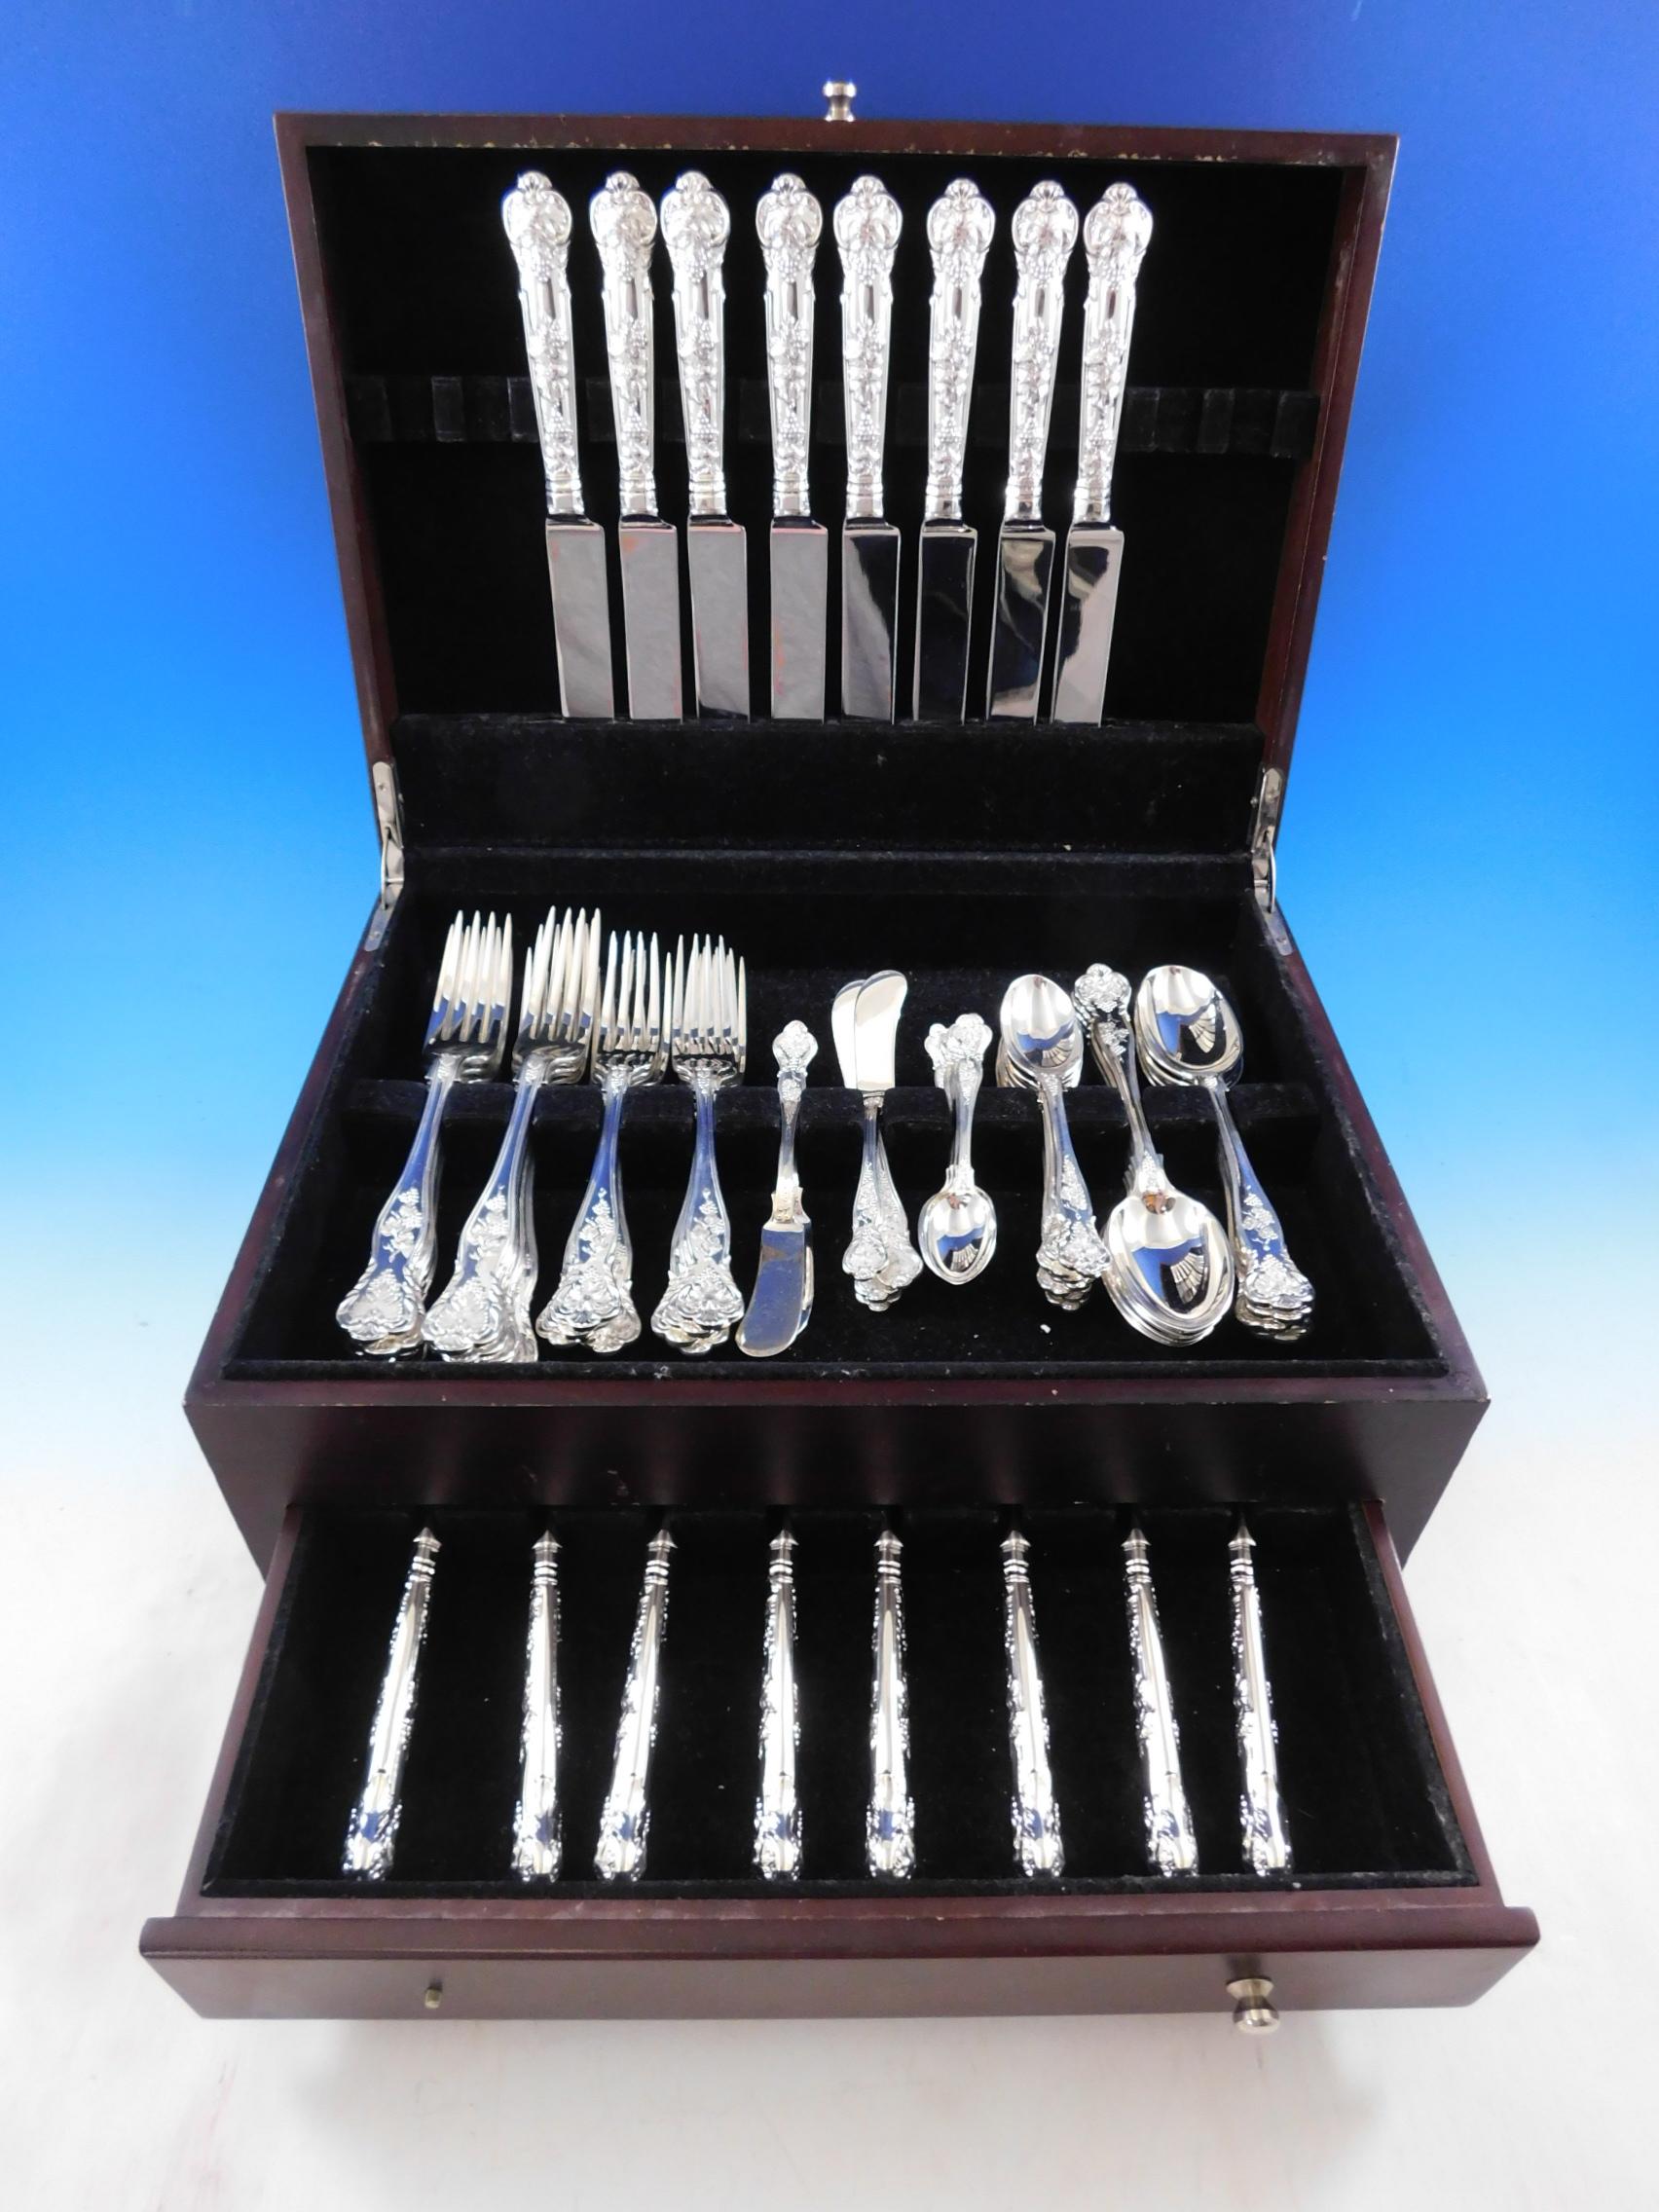 Bright Vine by Edward Barnard & Sons London, England 1999 grape motif Sterling Silver Flatware set - 64 pieces. This set includes:

8 large dinner knives, 10